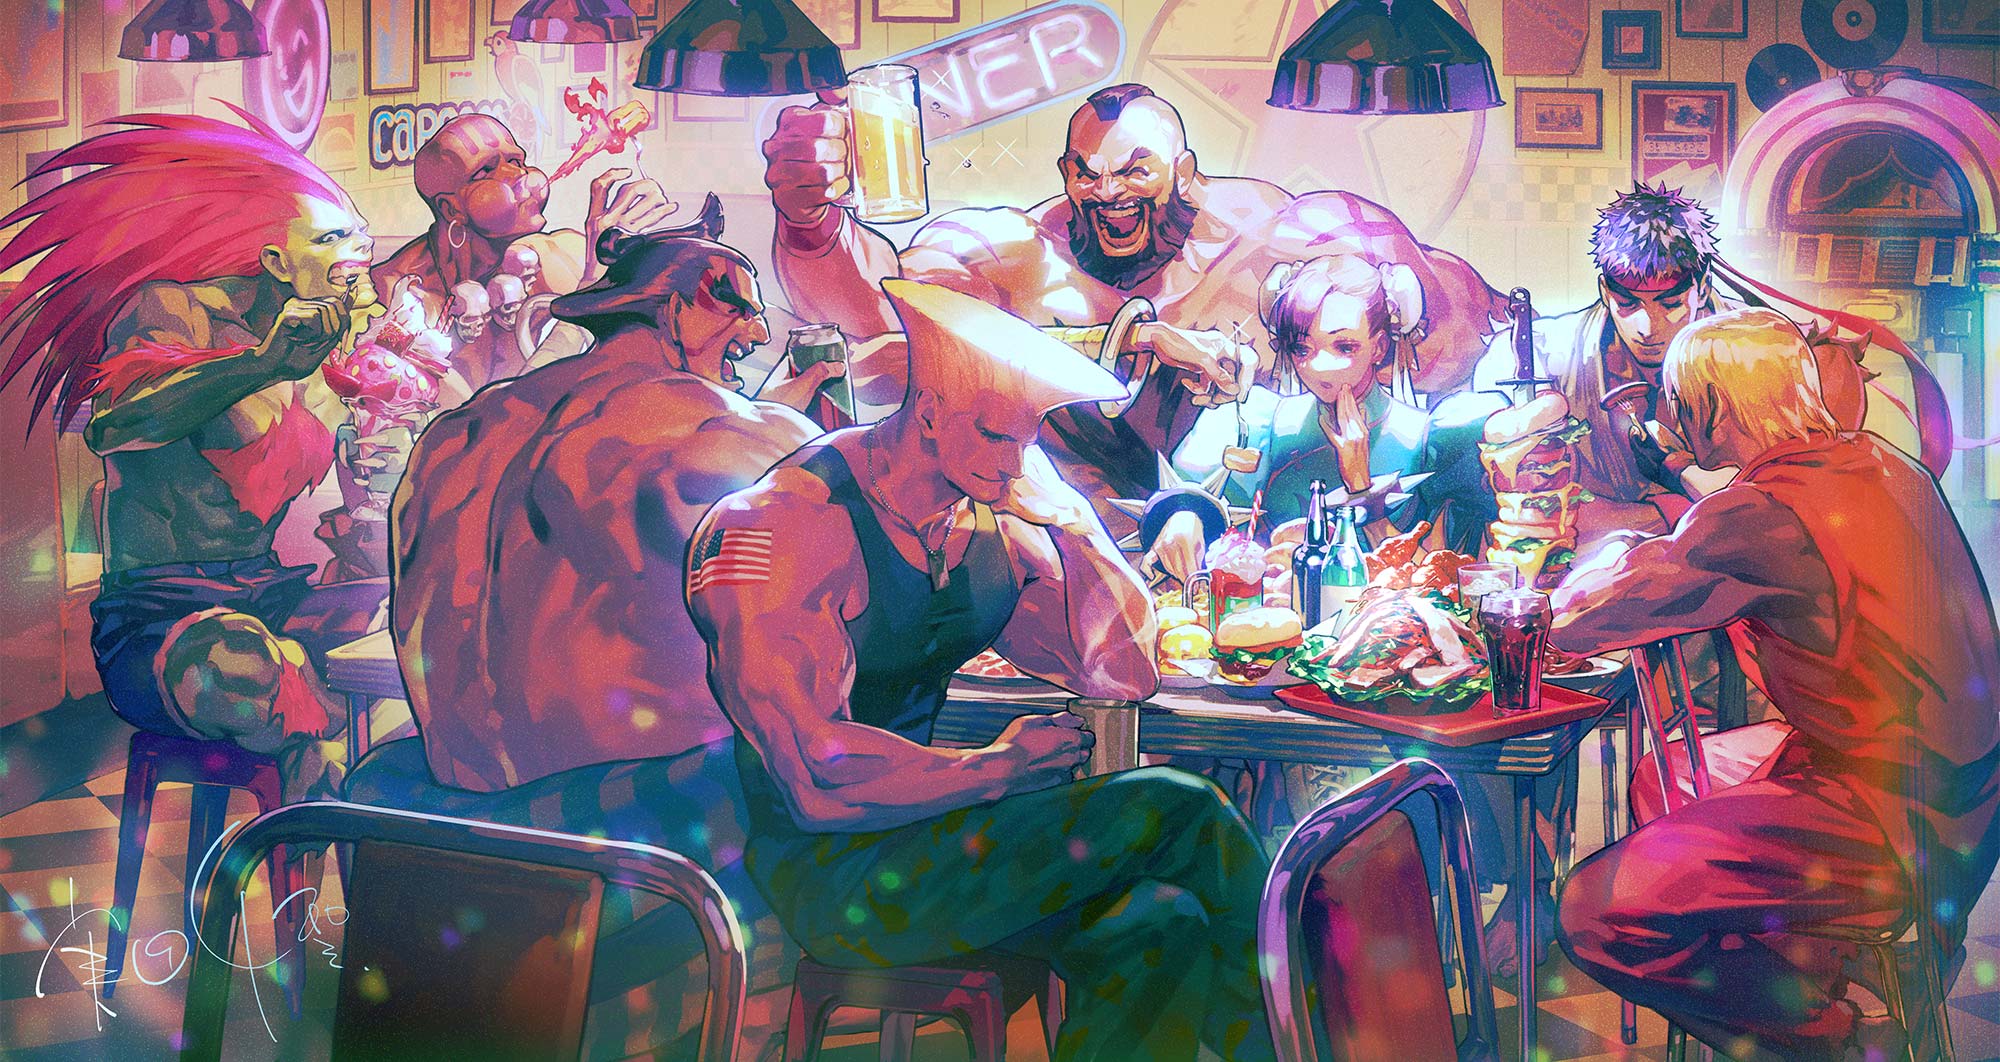 Street Fighter 35th Anniversary English Website Shared; Illustrations, Staff Comments & More